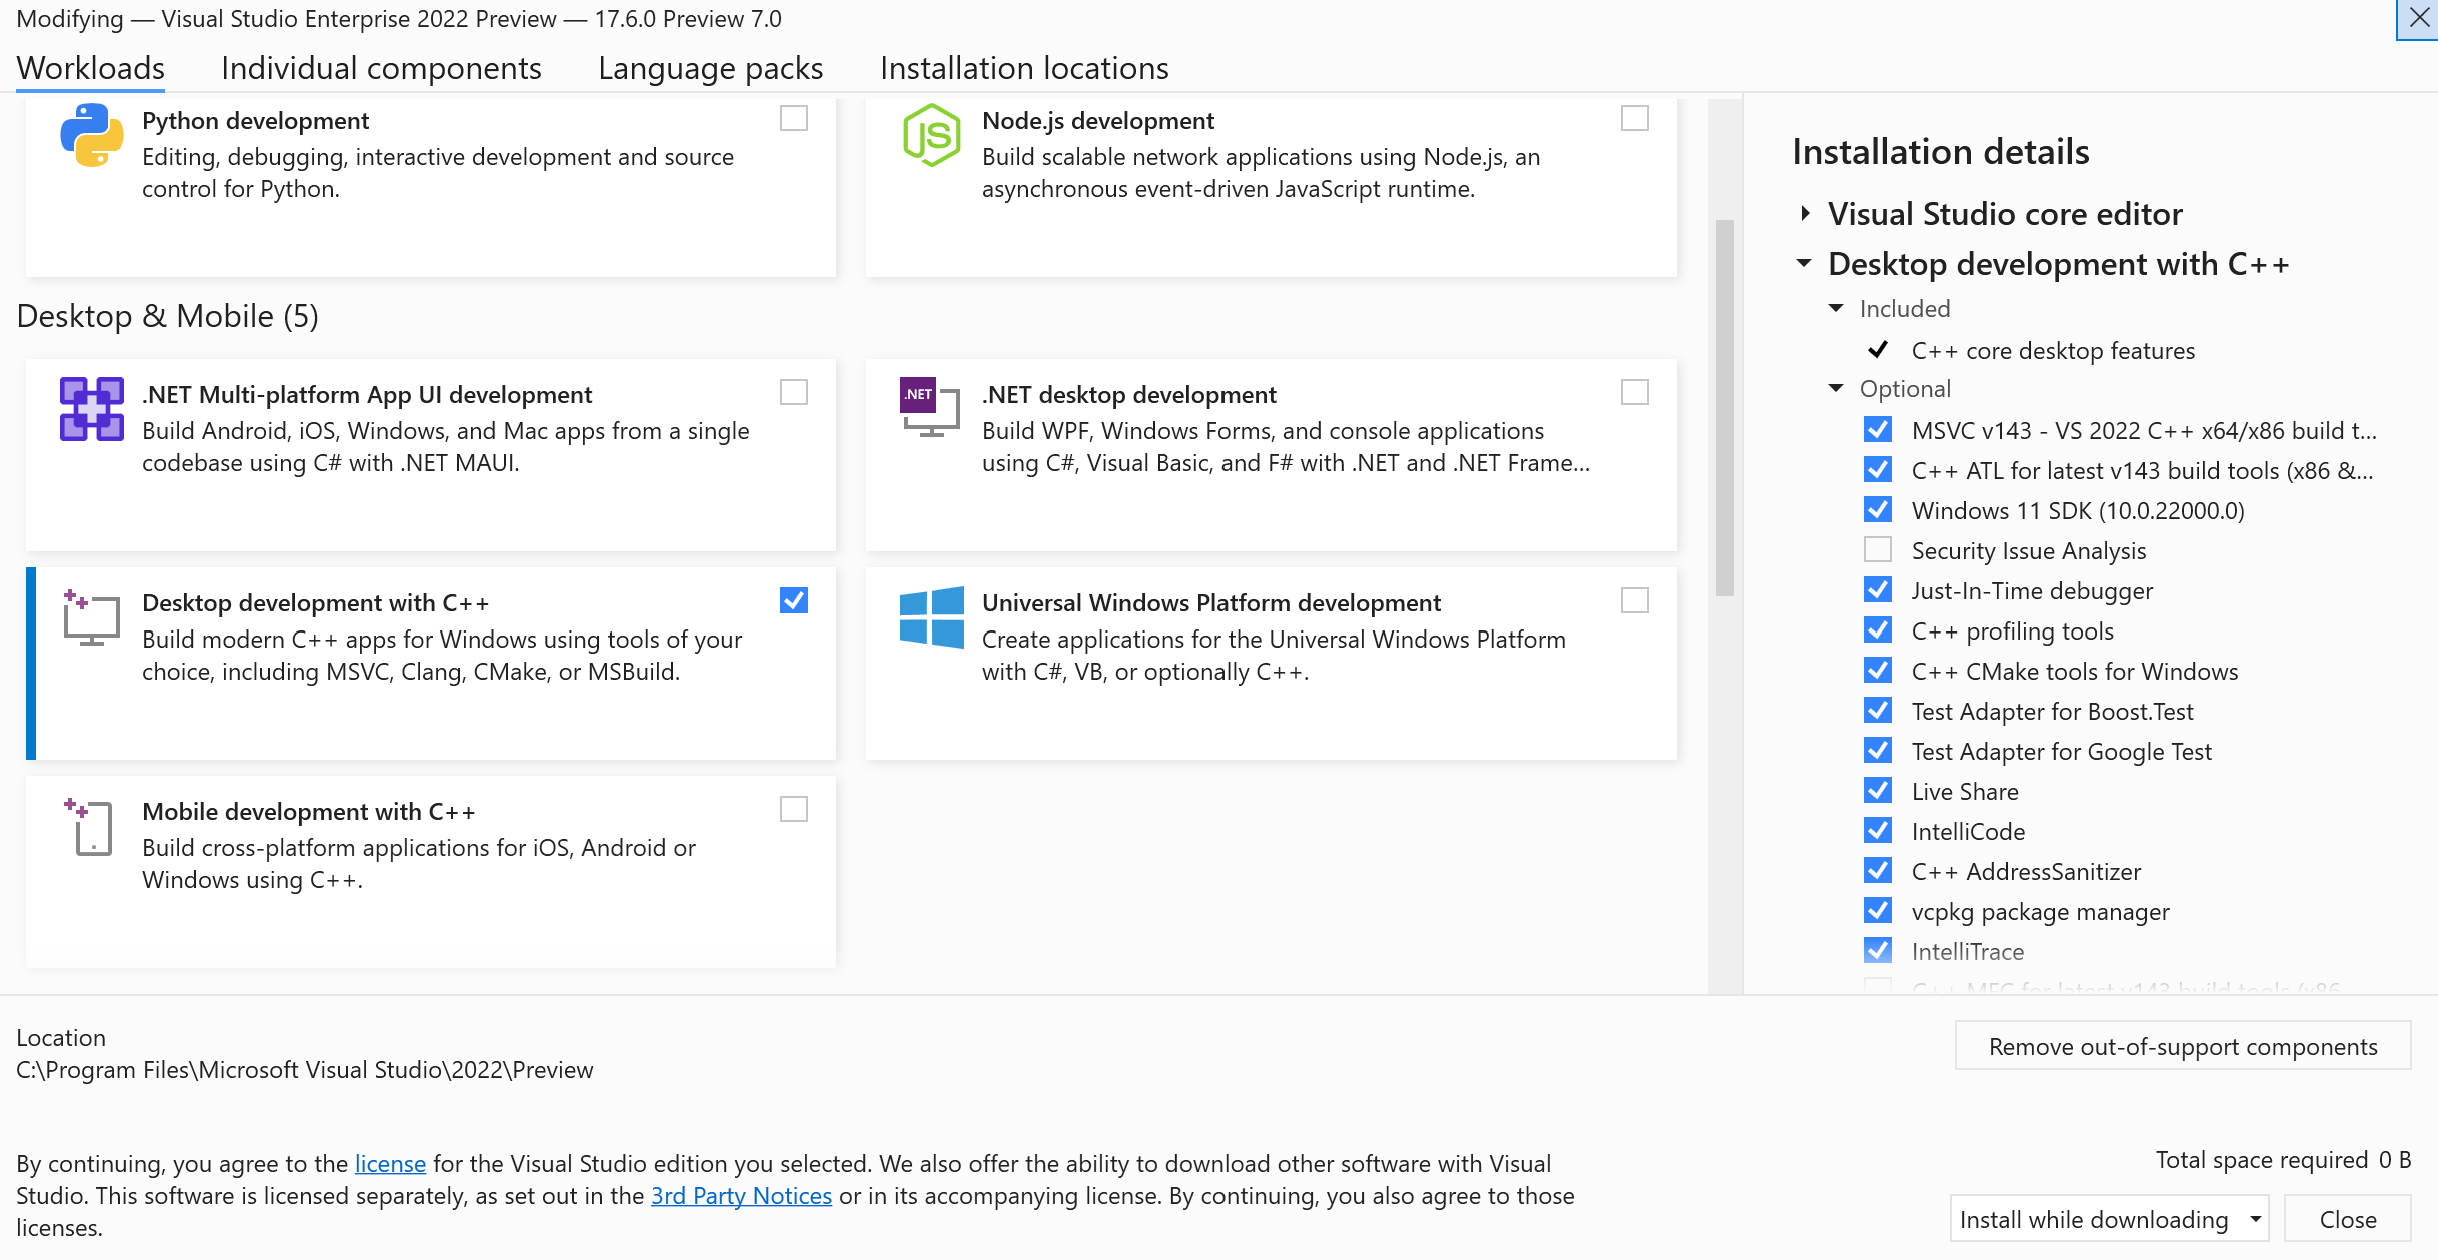 vcpkg is Now Included with Visual Studio - C++ Team Blog